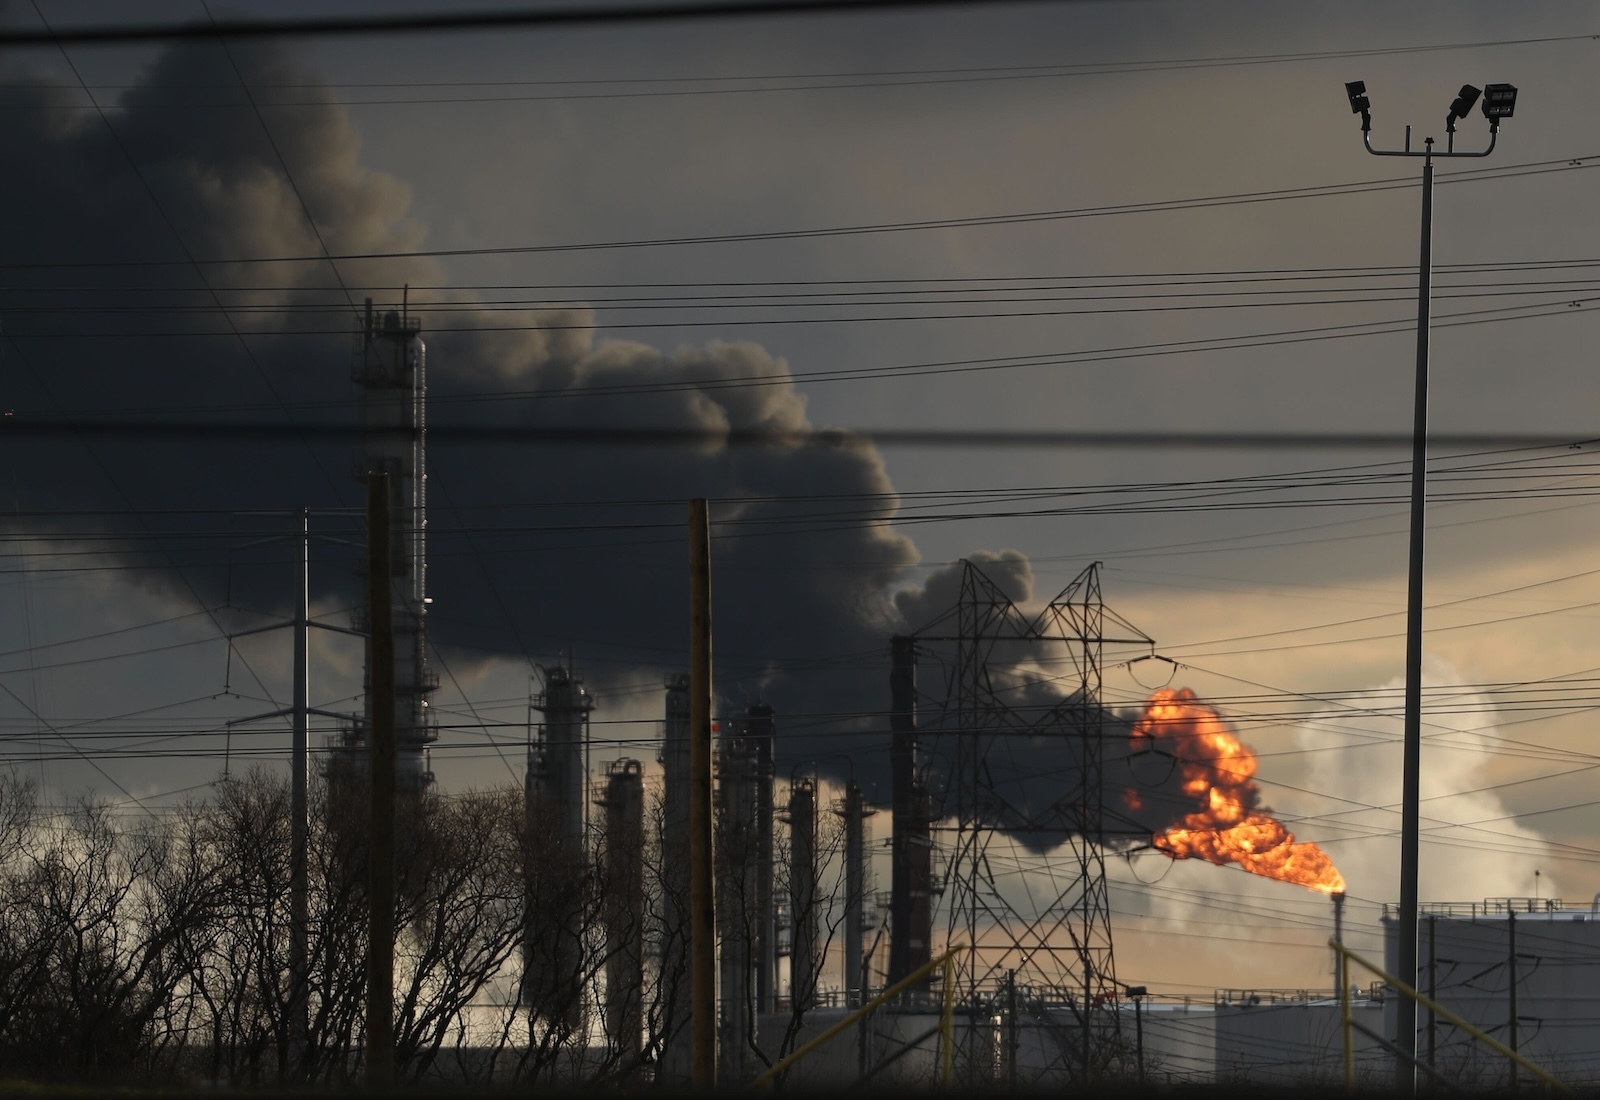 Smokestacks of a petrochemical refinery in the distance, with flames and smoke billowing out of one and blowing leftward.